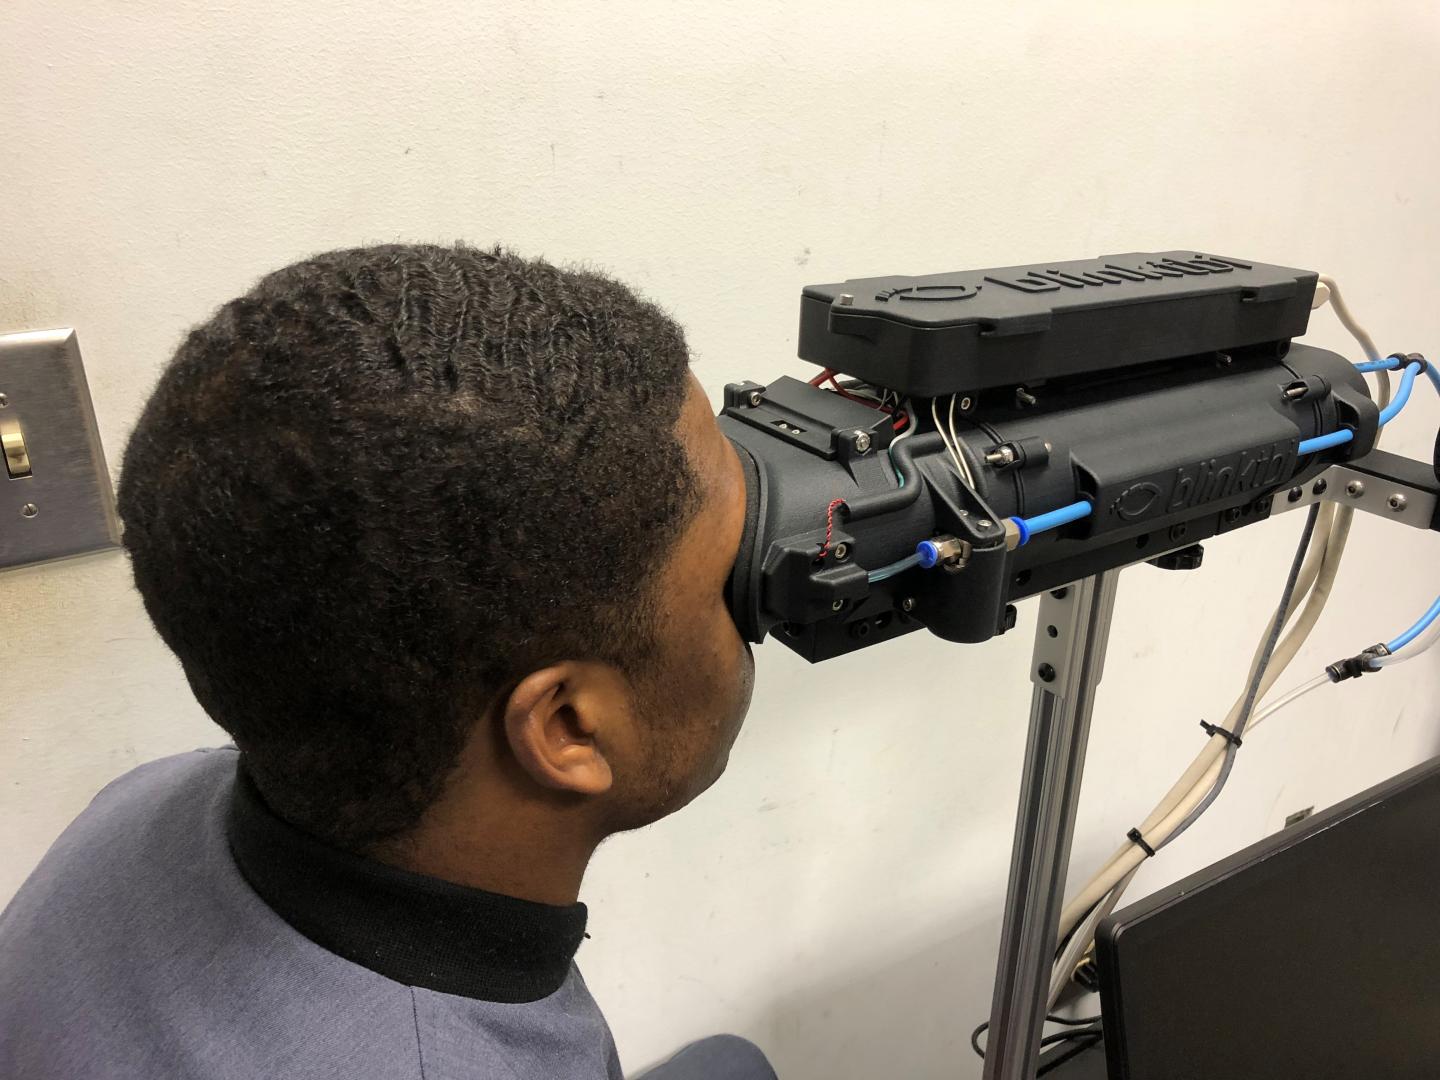 The Blink Reflexometer being used to measure the blink reflex of a cadet at the Citadel. Source: The Citadel